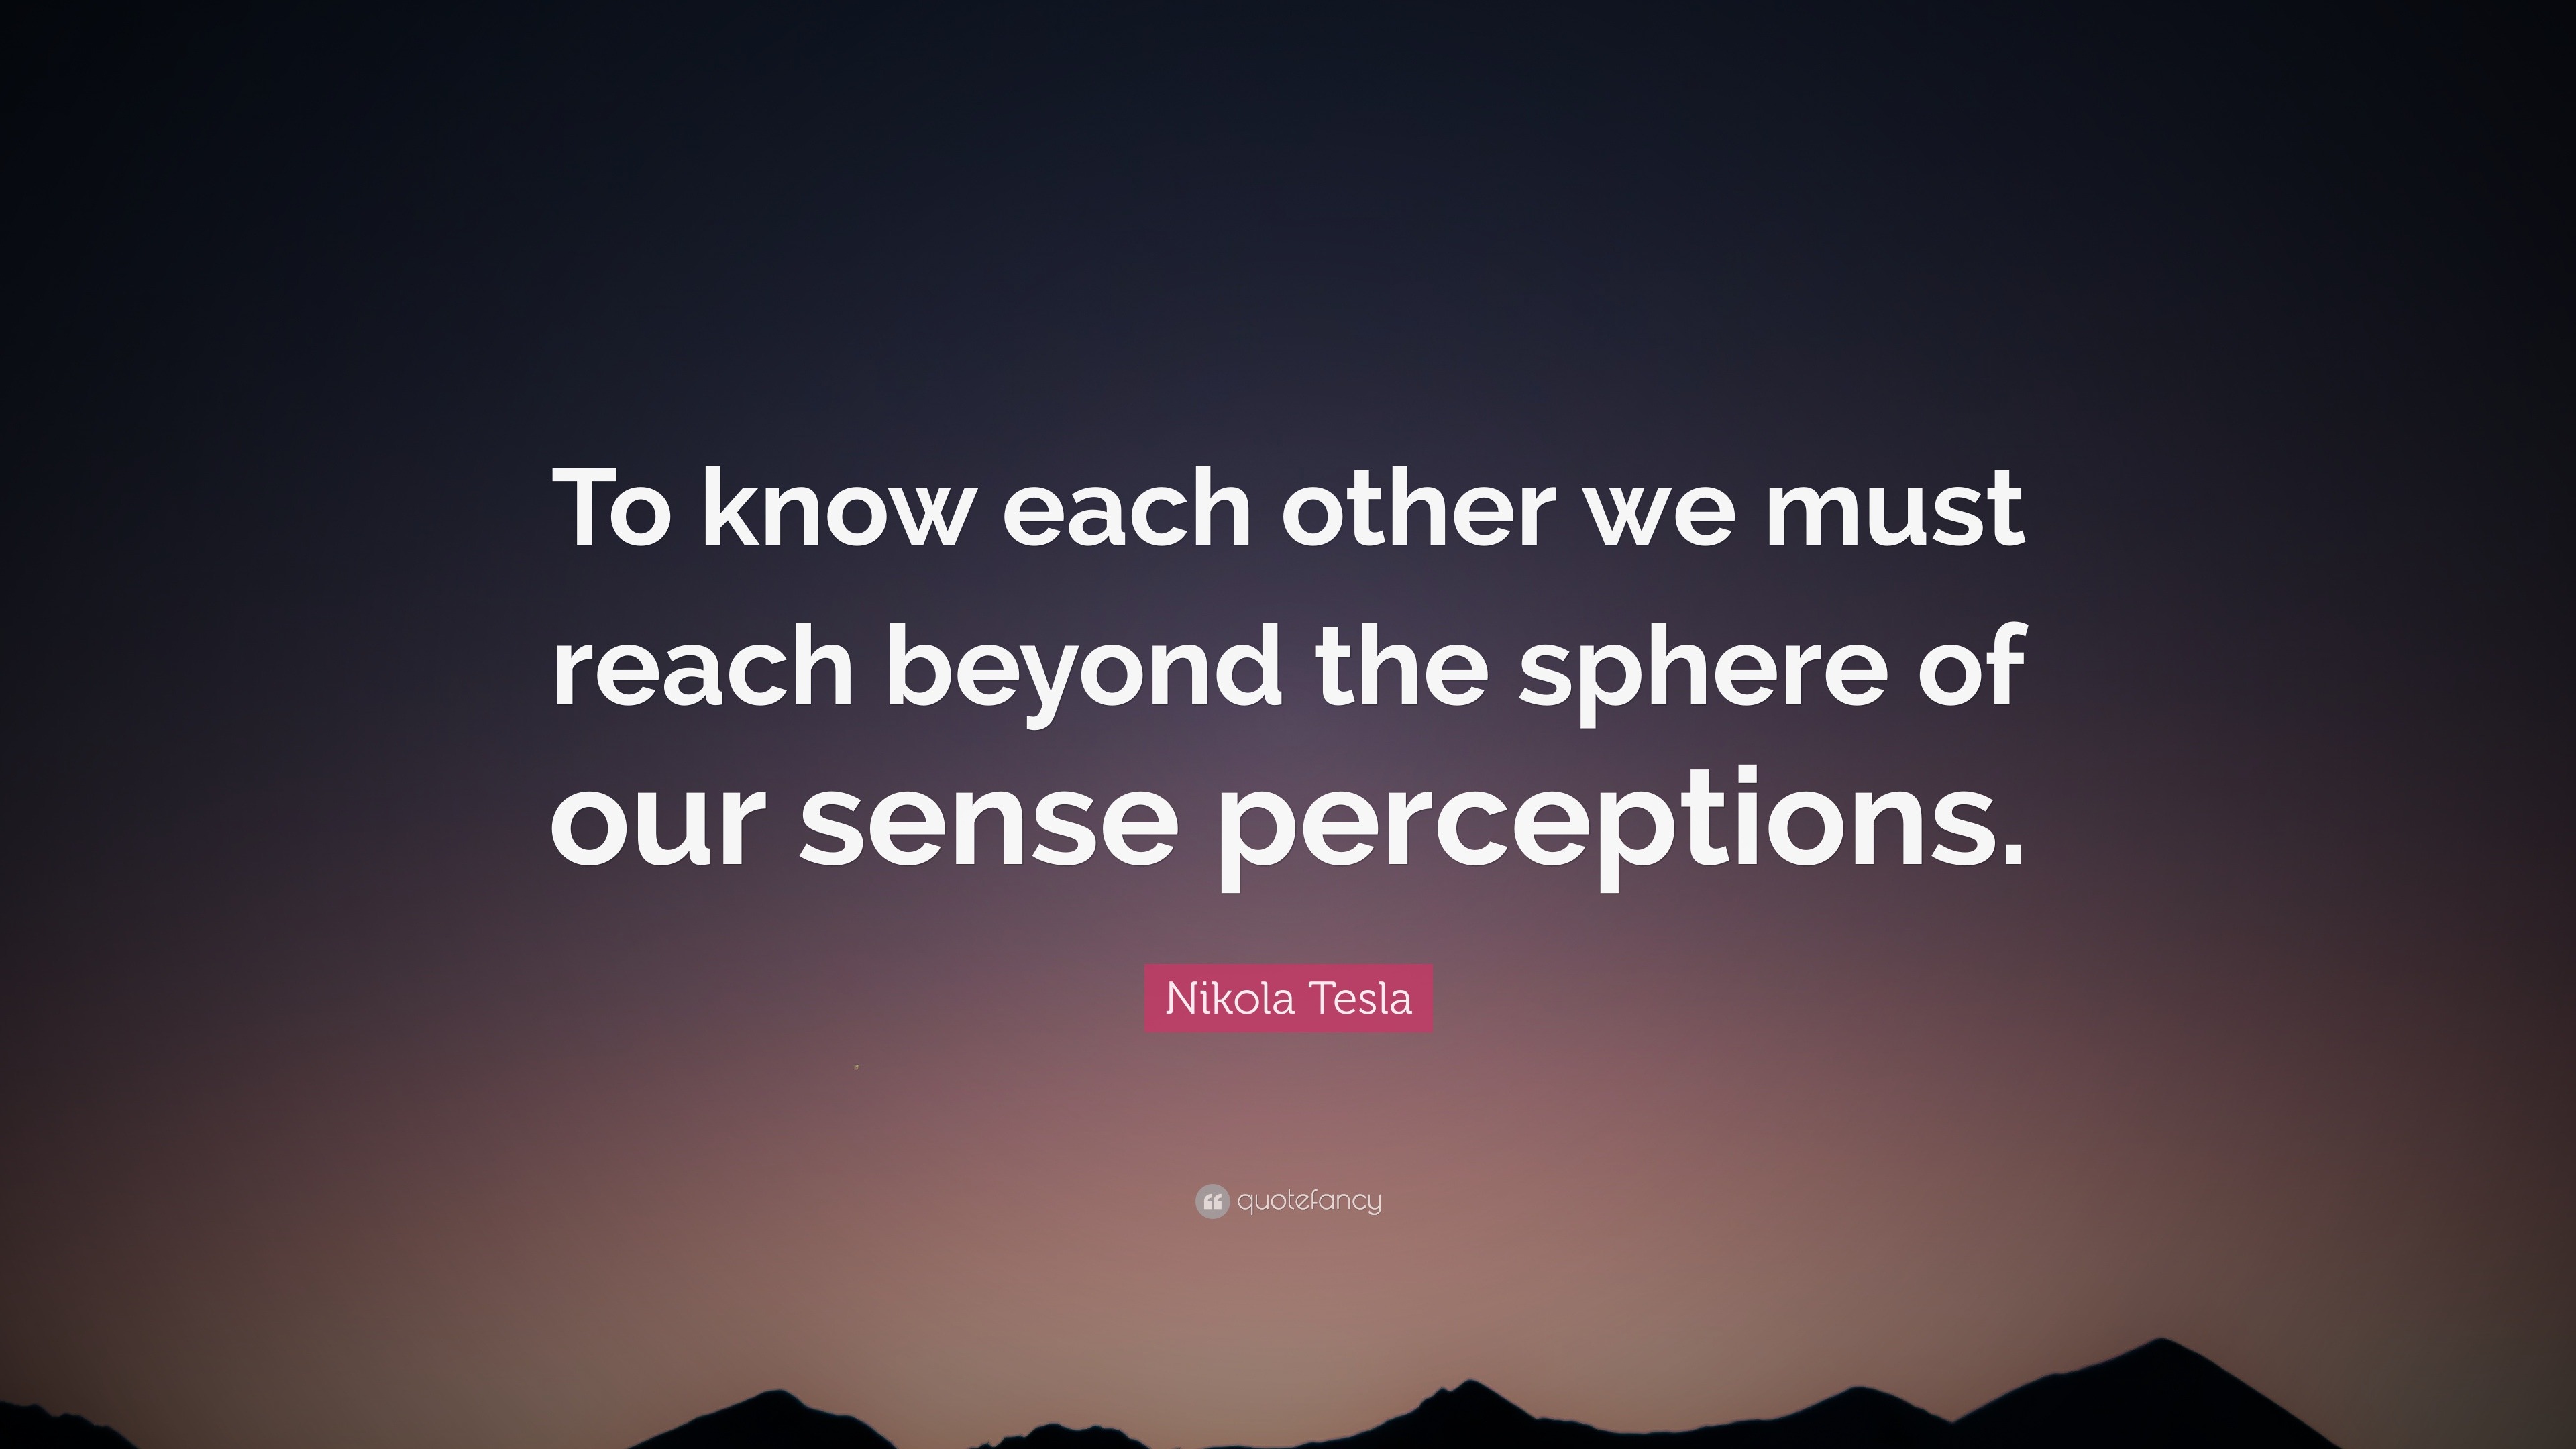 Nikola Tesla Quote: “To know each other we must reach beyond the sphere ...